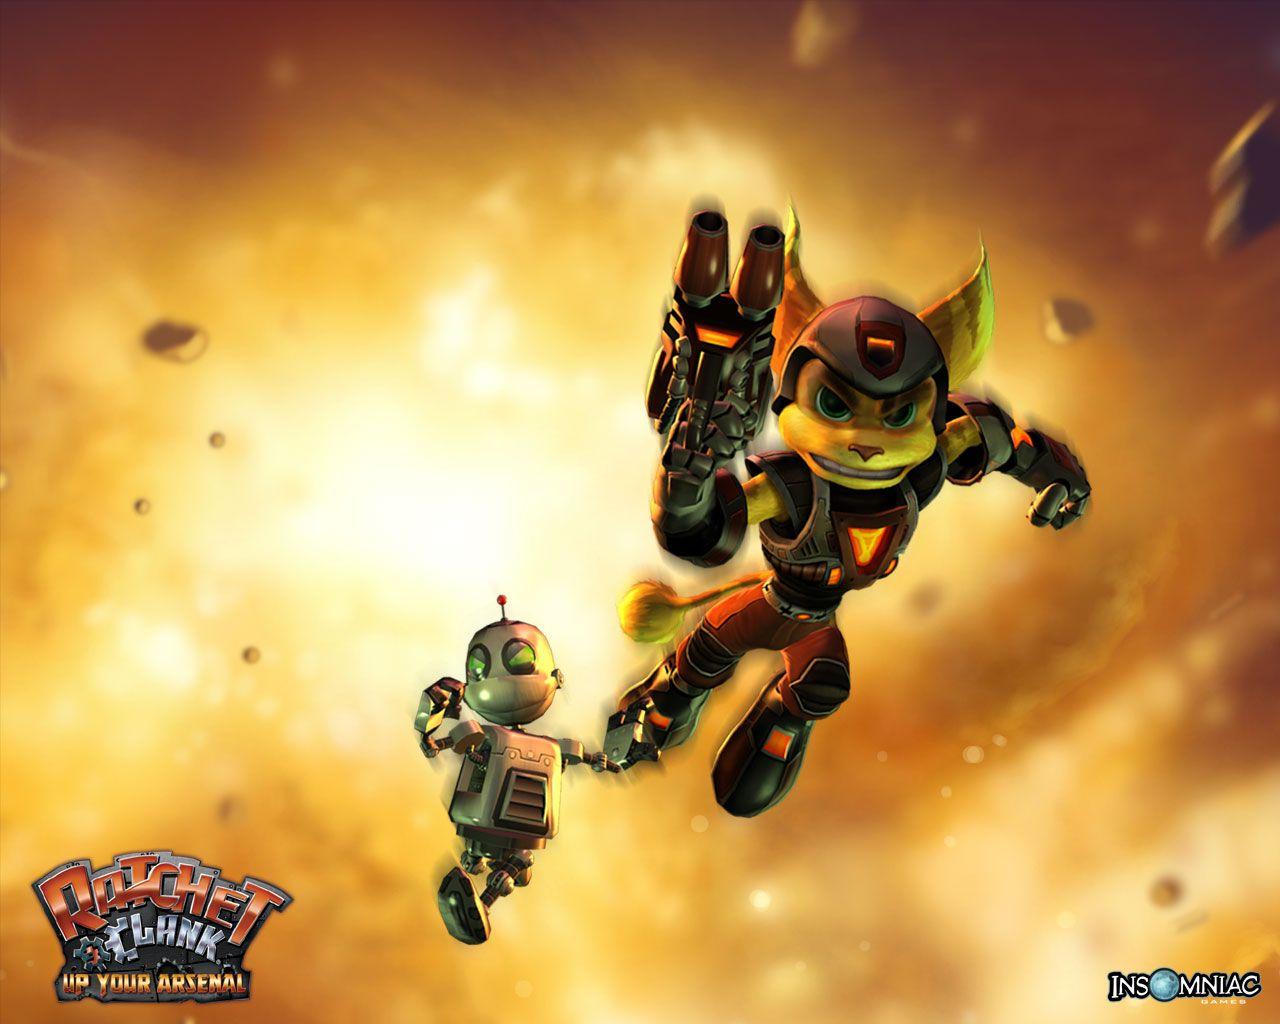 Ratchet And Clank Wallpaper